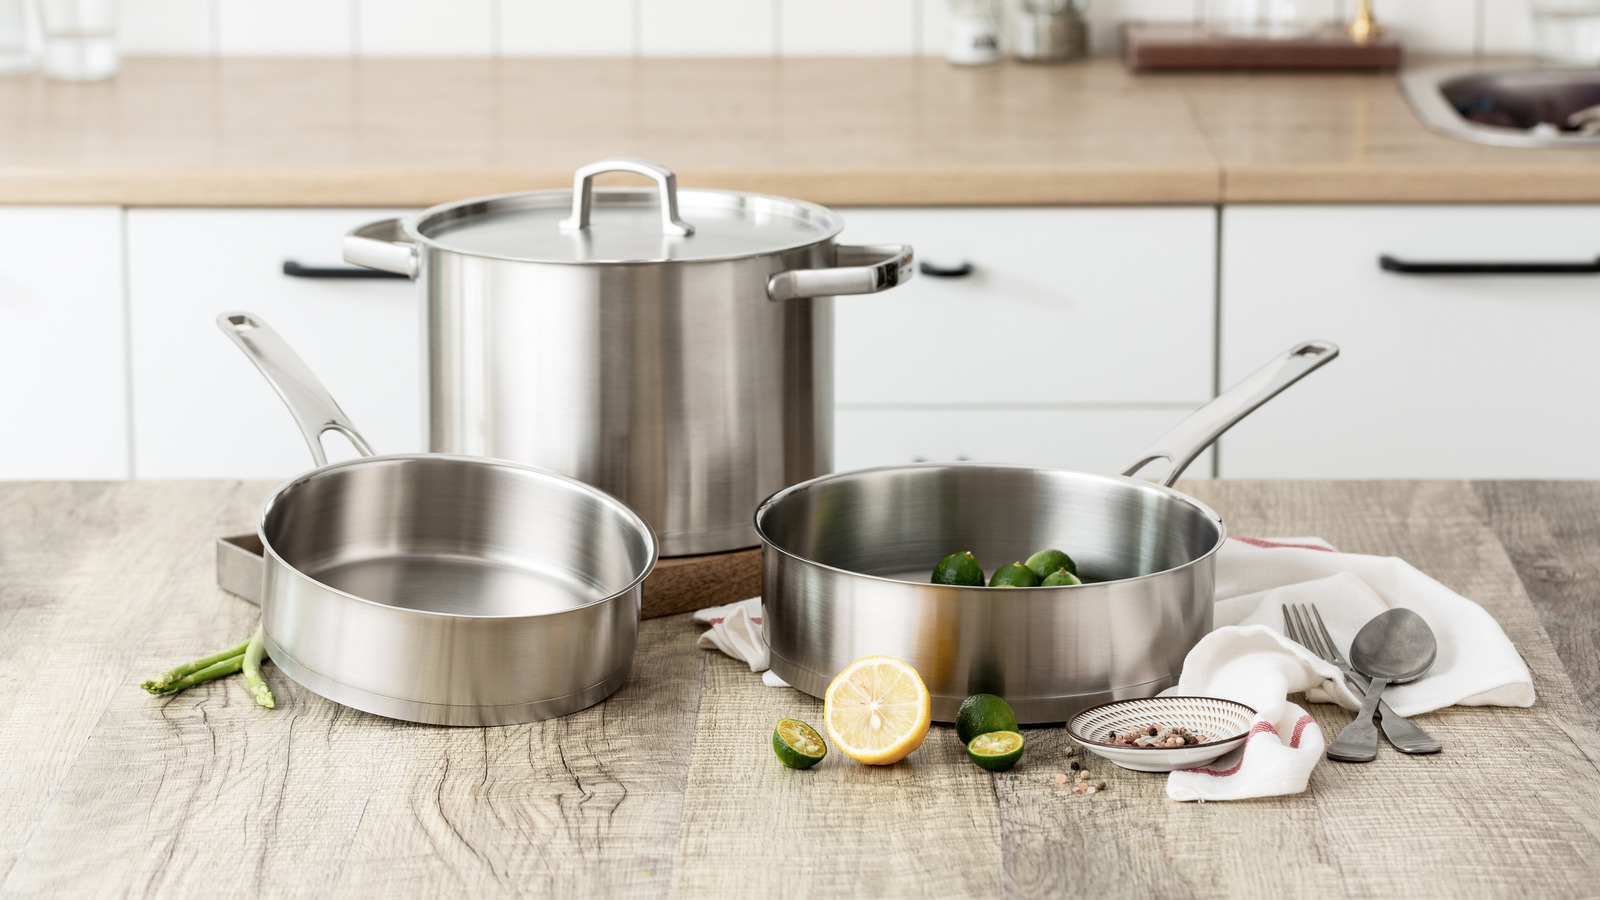 https://www.tastingtable.com/img/gallery/what-is-fully-clad-cookware-and-why-should-you-use-it/l-intro-1661806753.jpg